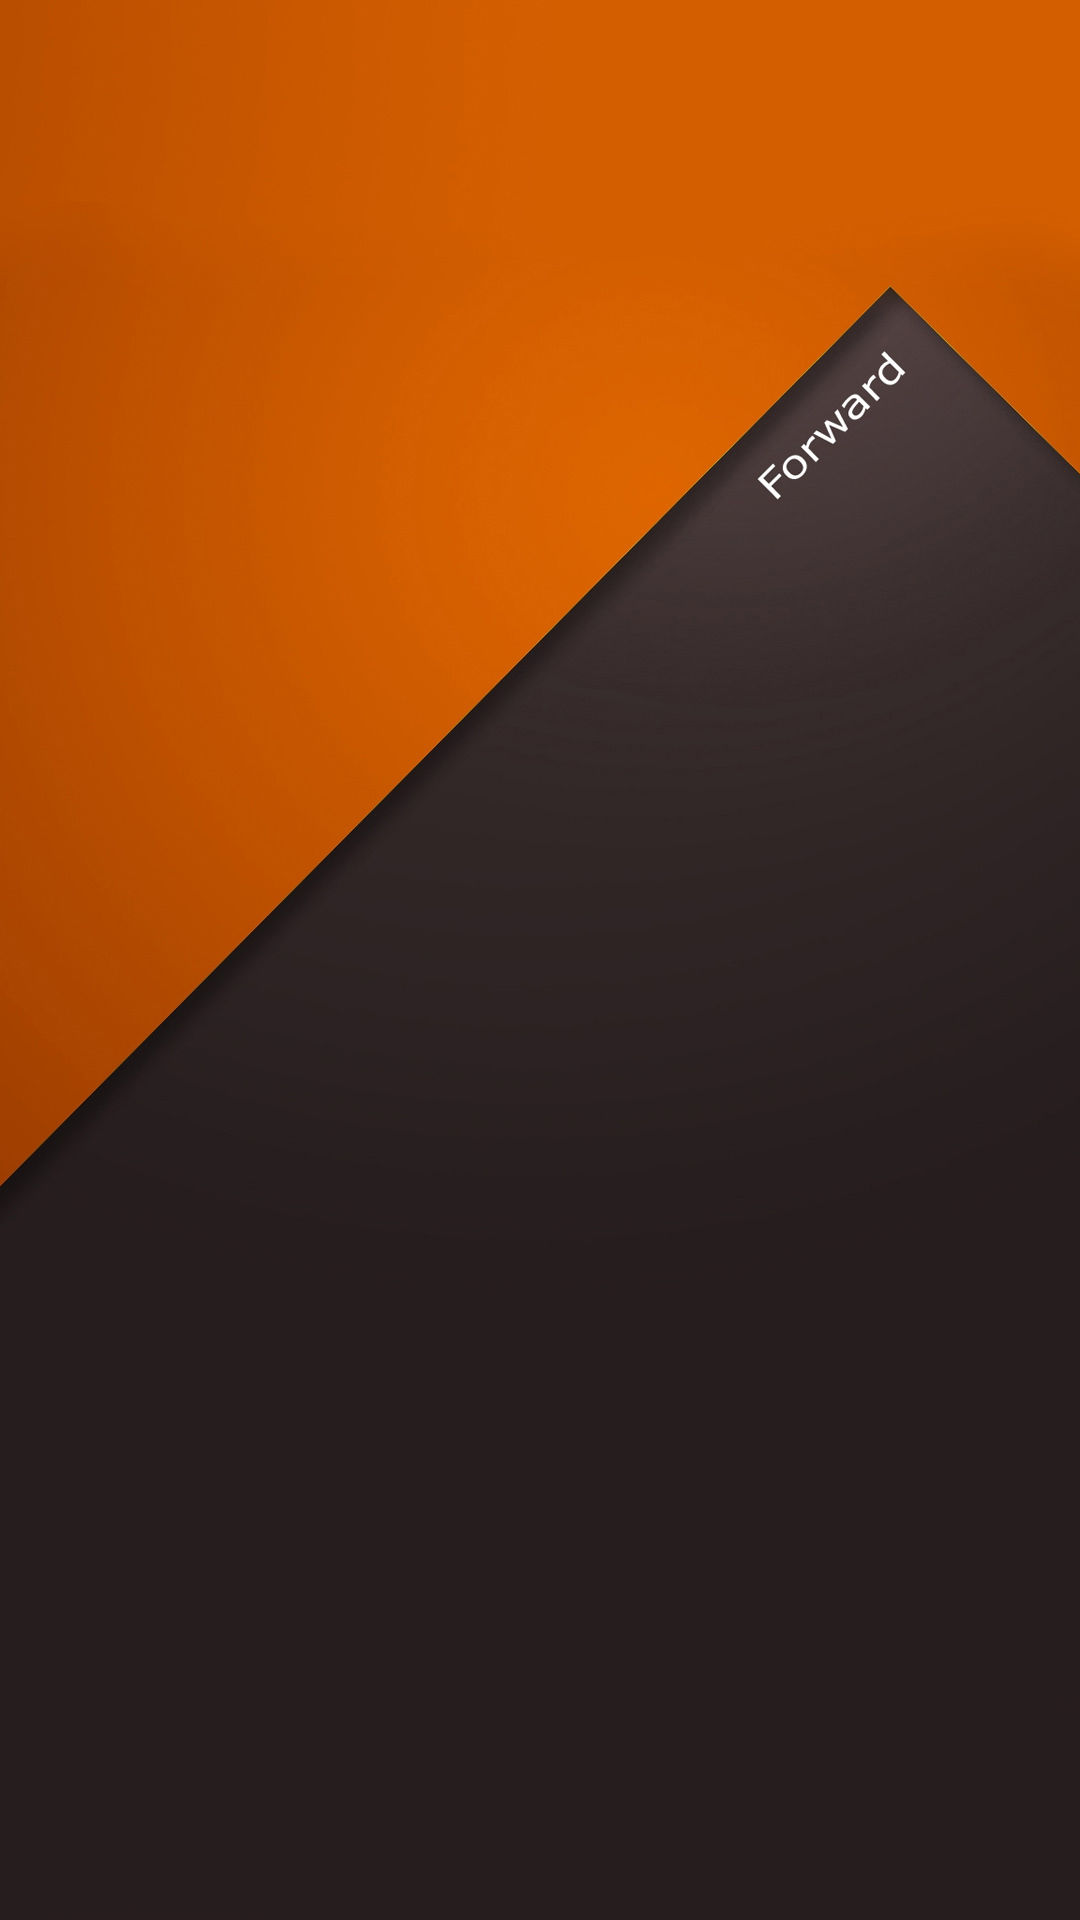 hd wallpaper for android 5 inch,orange,yellow,brown,sky,material property